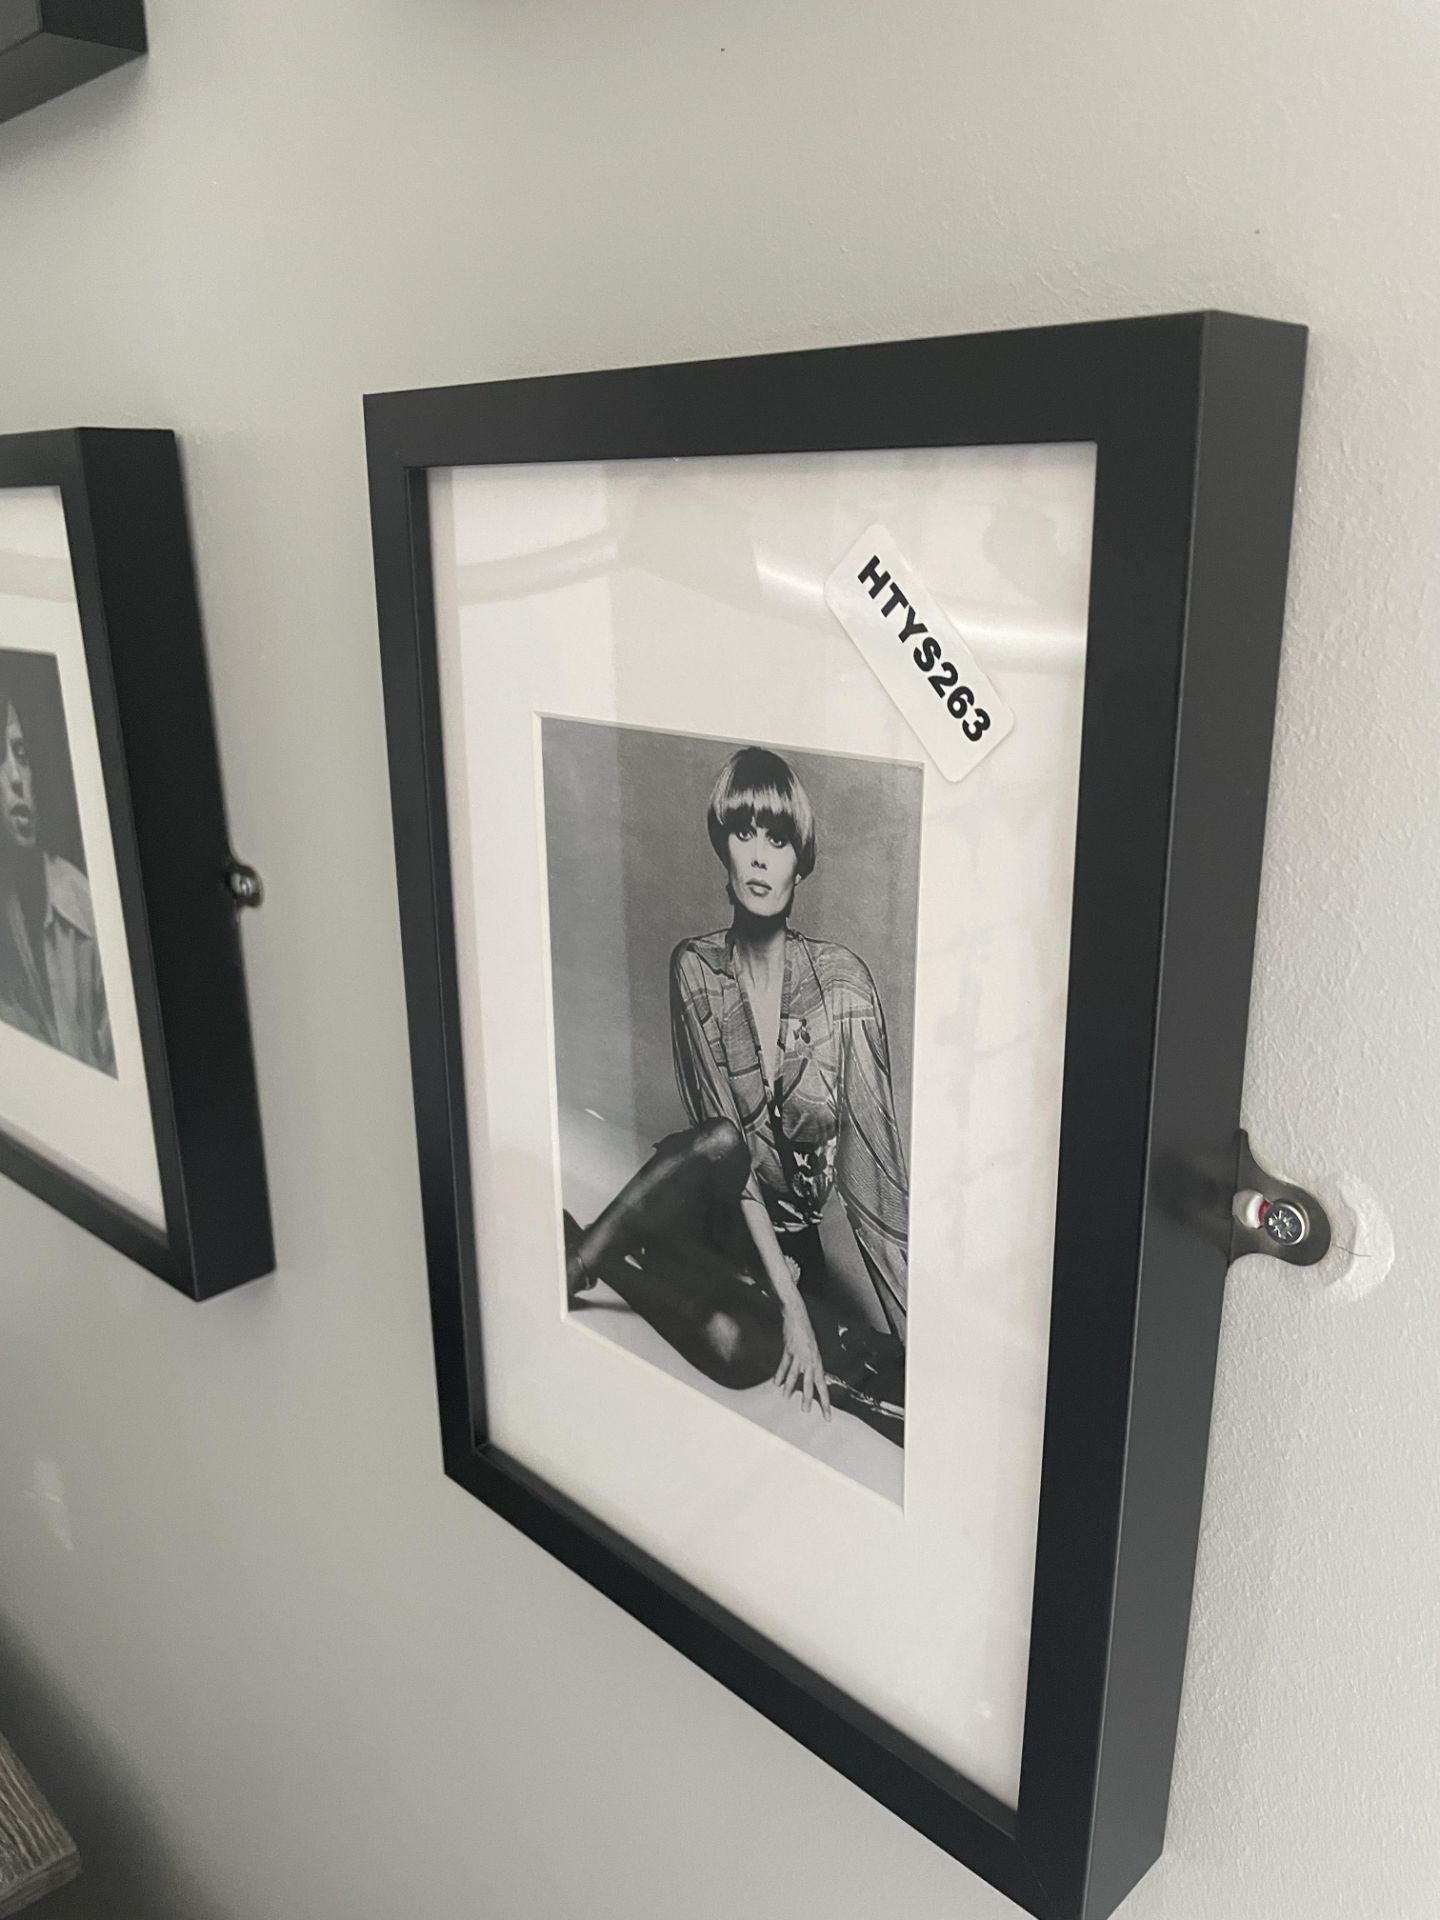 4 x Wall Pictures Featuring Well Known 1960's Actors - Black and White Images With Black Frames - - Image 2 of 4